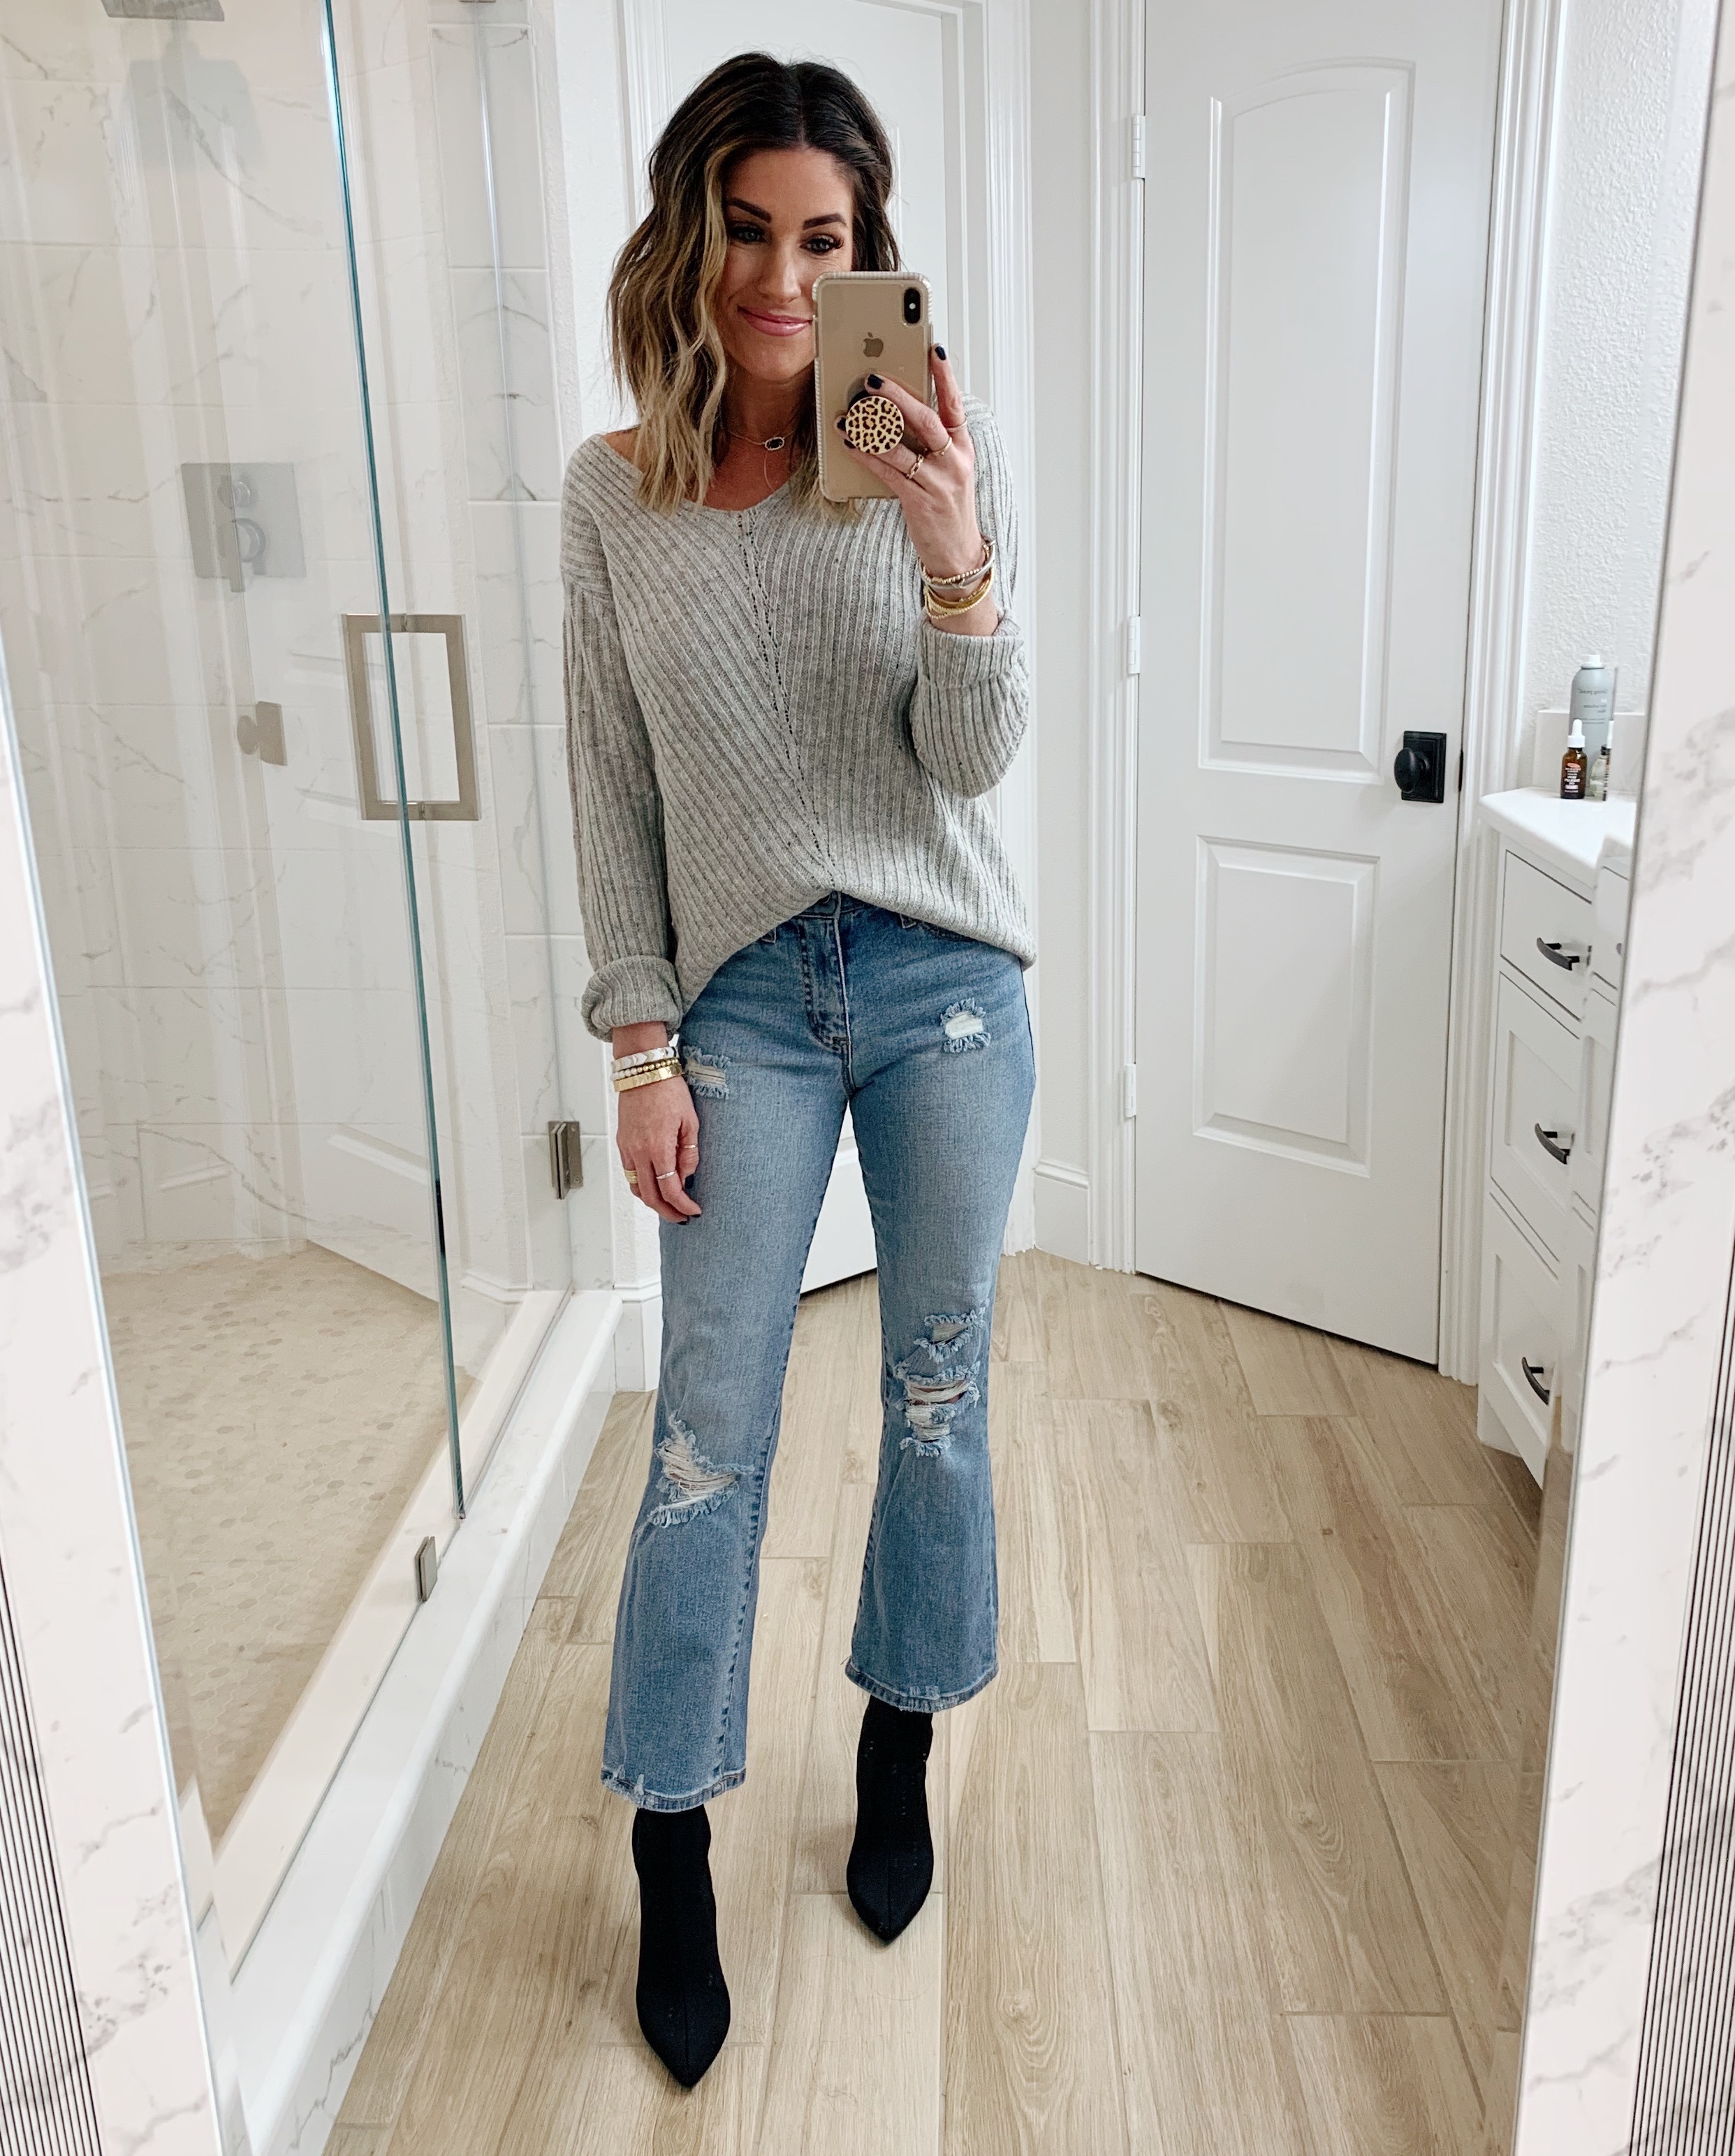 Jeans and Sweaters From Walmart - The Sister Studio